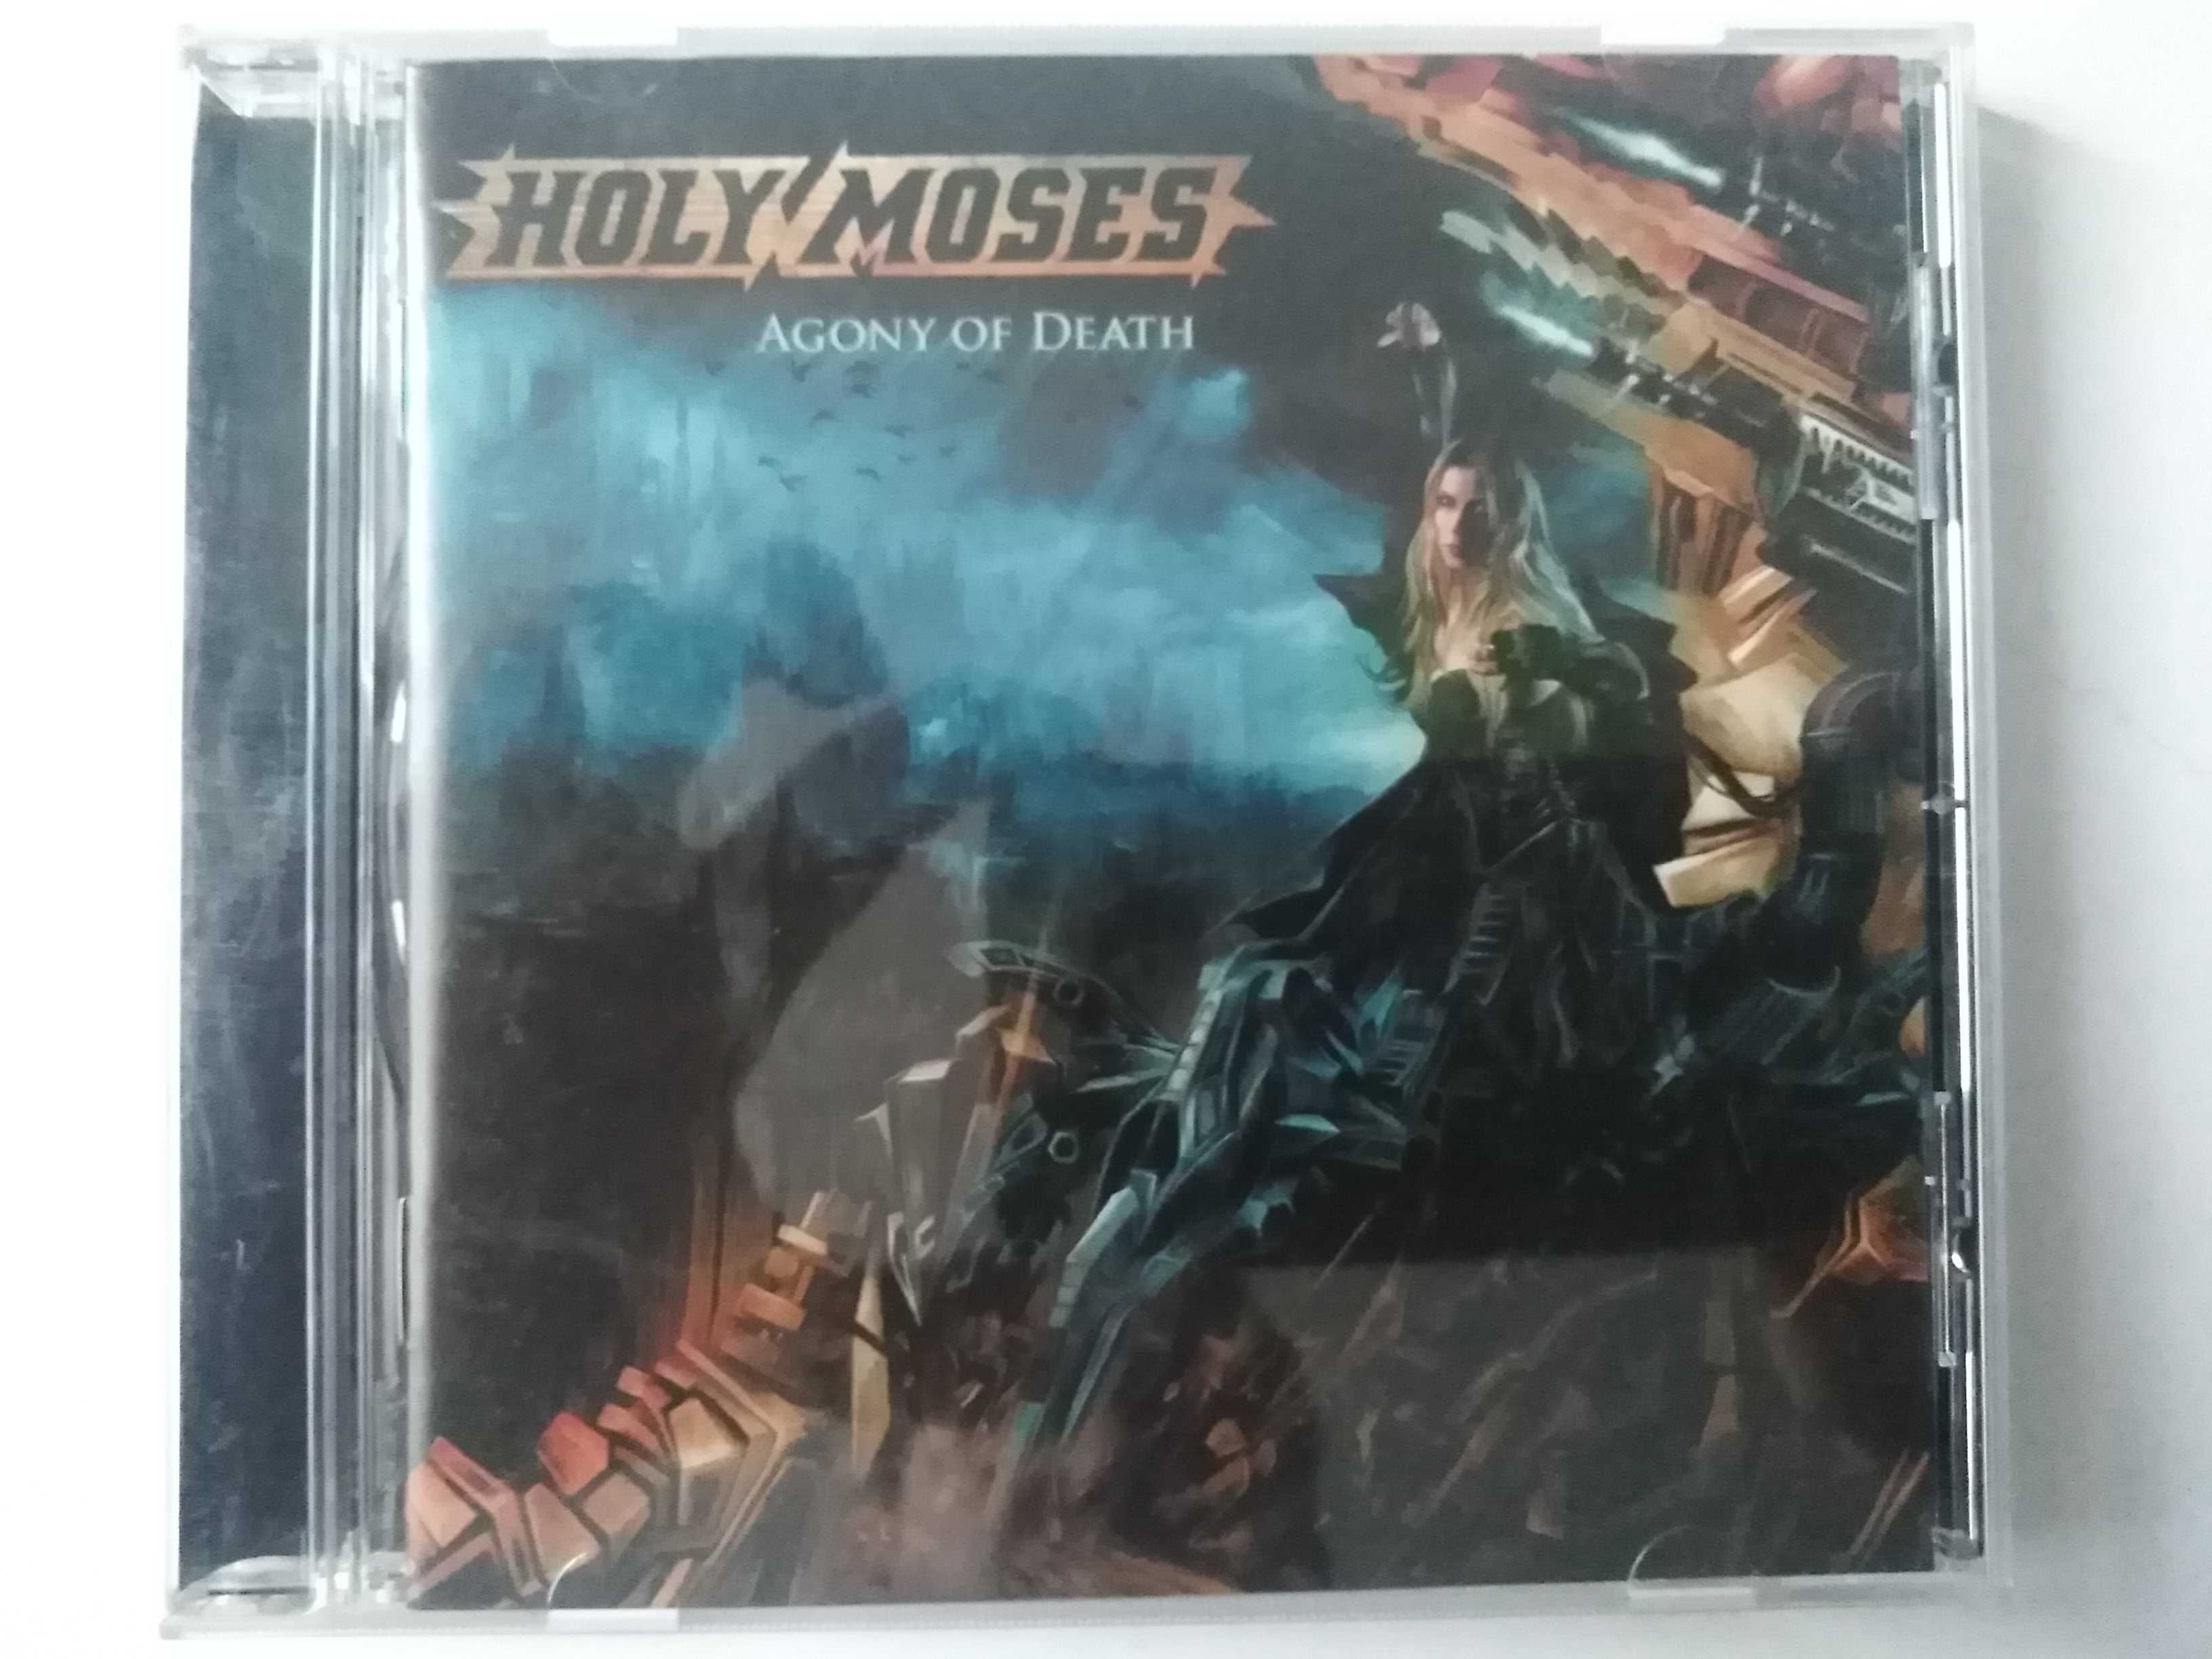 Audio CD Holy Moses "Agony of Death 2008"